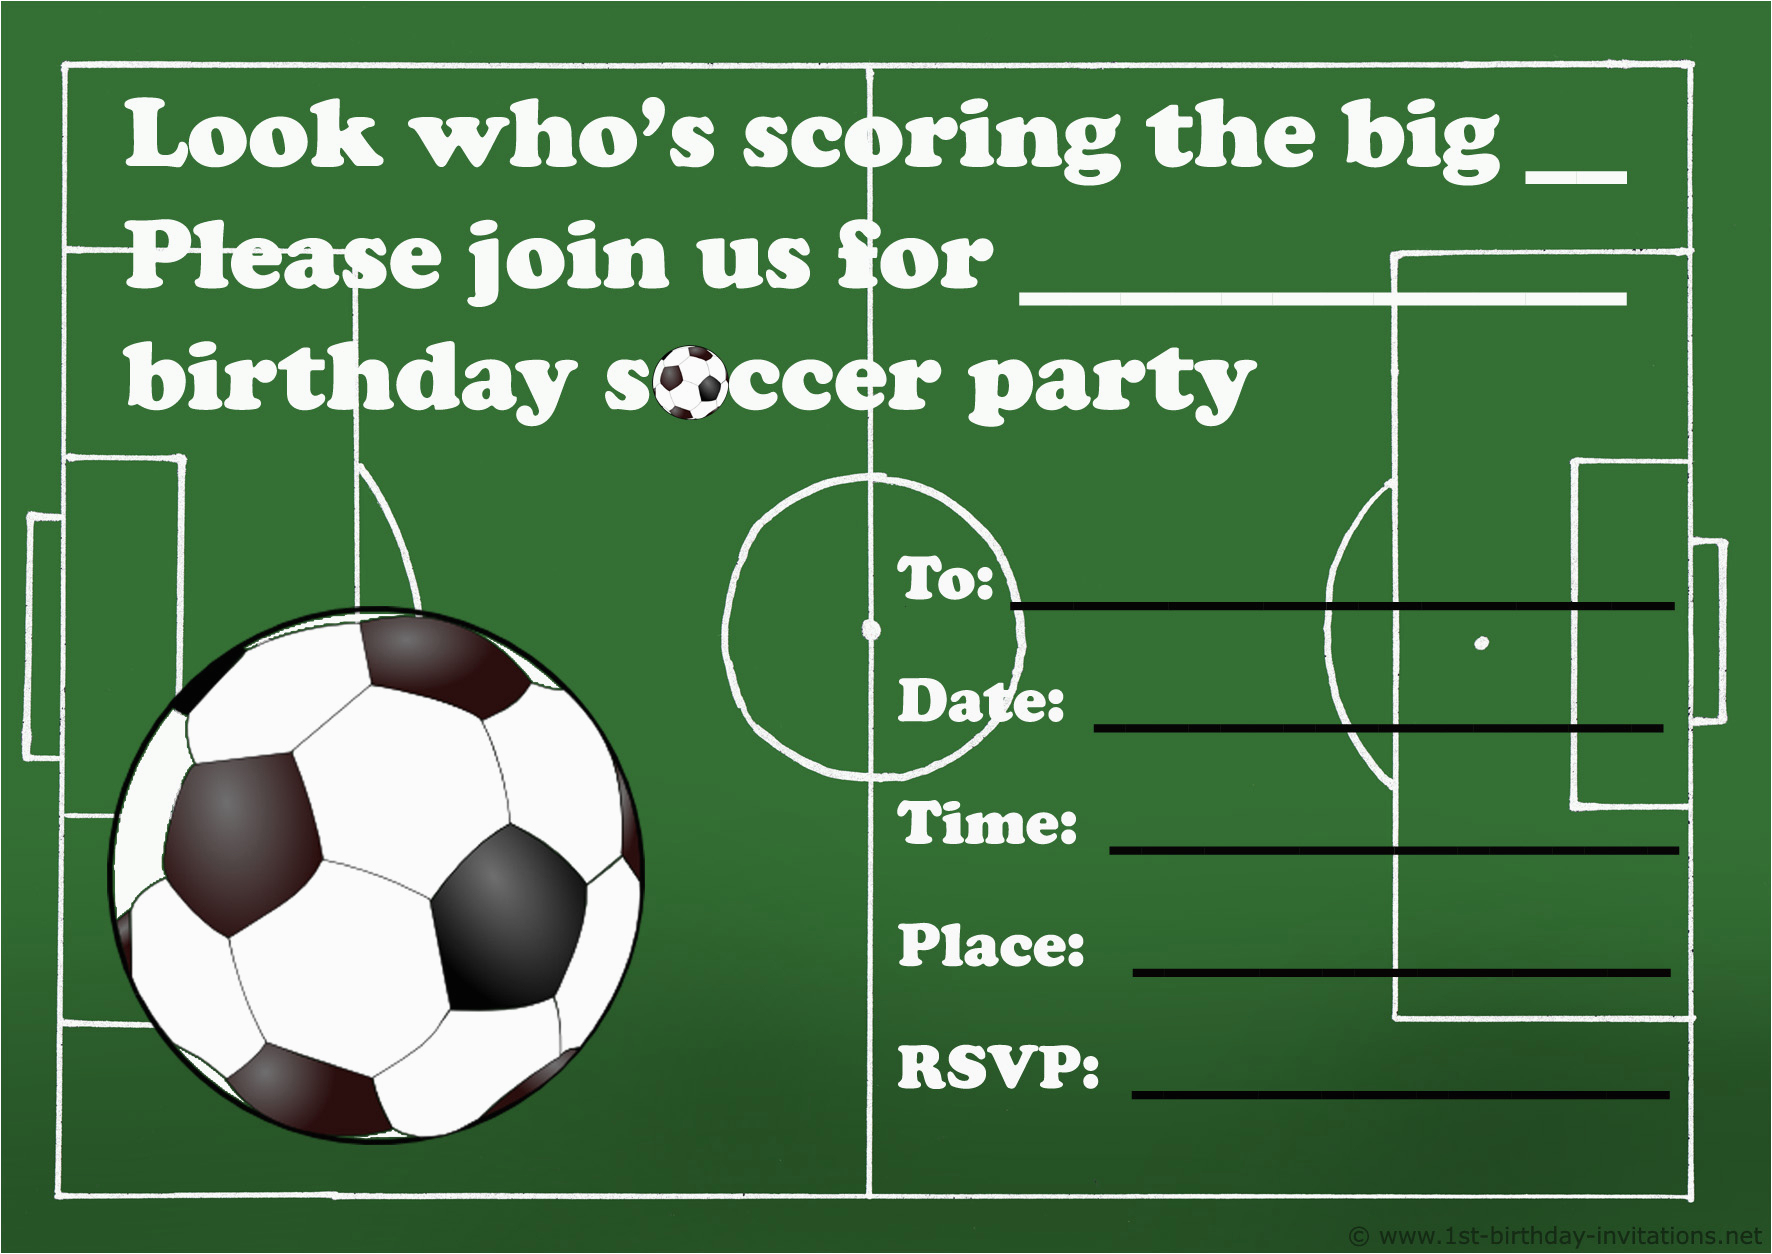 Soccer Invitations For Birthday Party | Birthdaybuzz - Free Printable Soccer Birthday Invitations